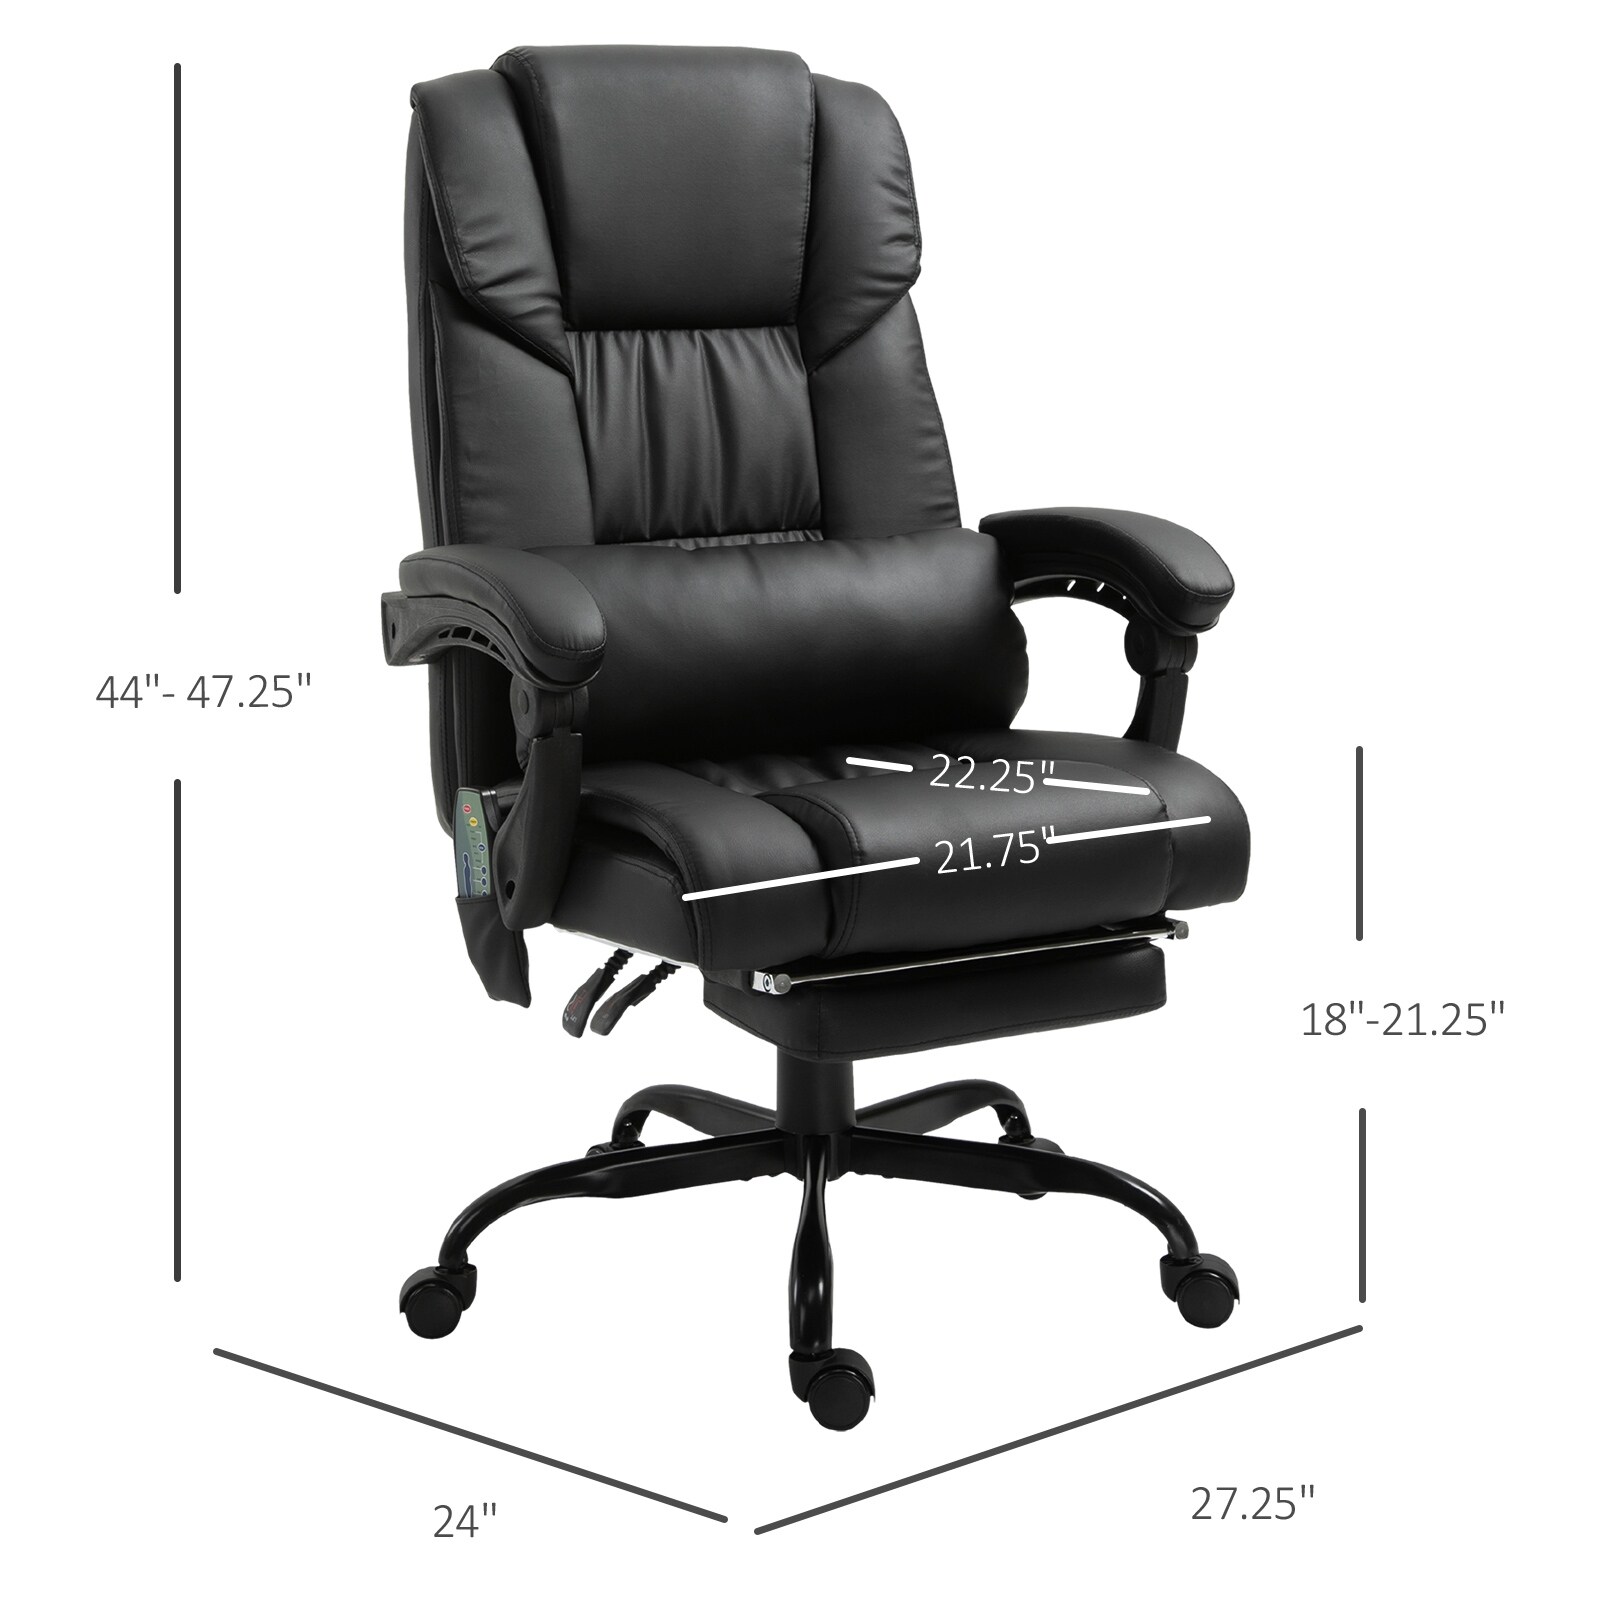 https://ak1.ostkcdn.com/images/products/is/images/direct/a21f04fdd62e8220883fe08e587efbe4f7e3f073/Vinsetto-Office-Desk-Chair-Recliner%2C-Height-Adjustable-Movable-Lumbar-Support-with-6-Point-Vibrating-Massage.jpg